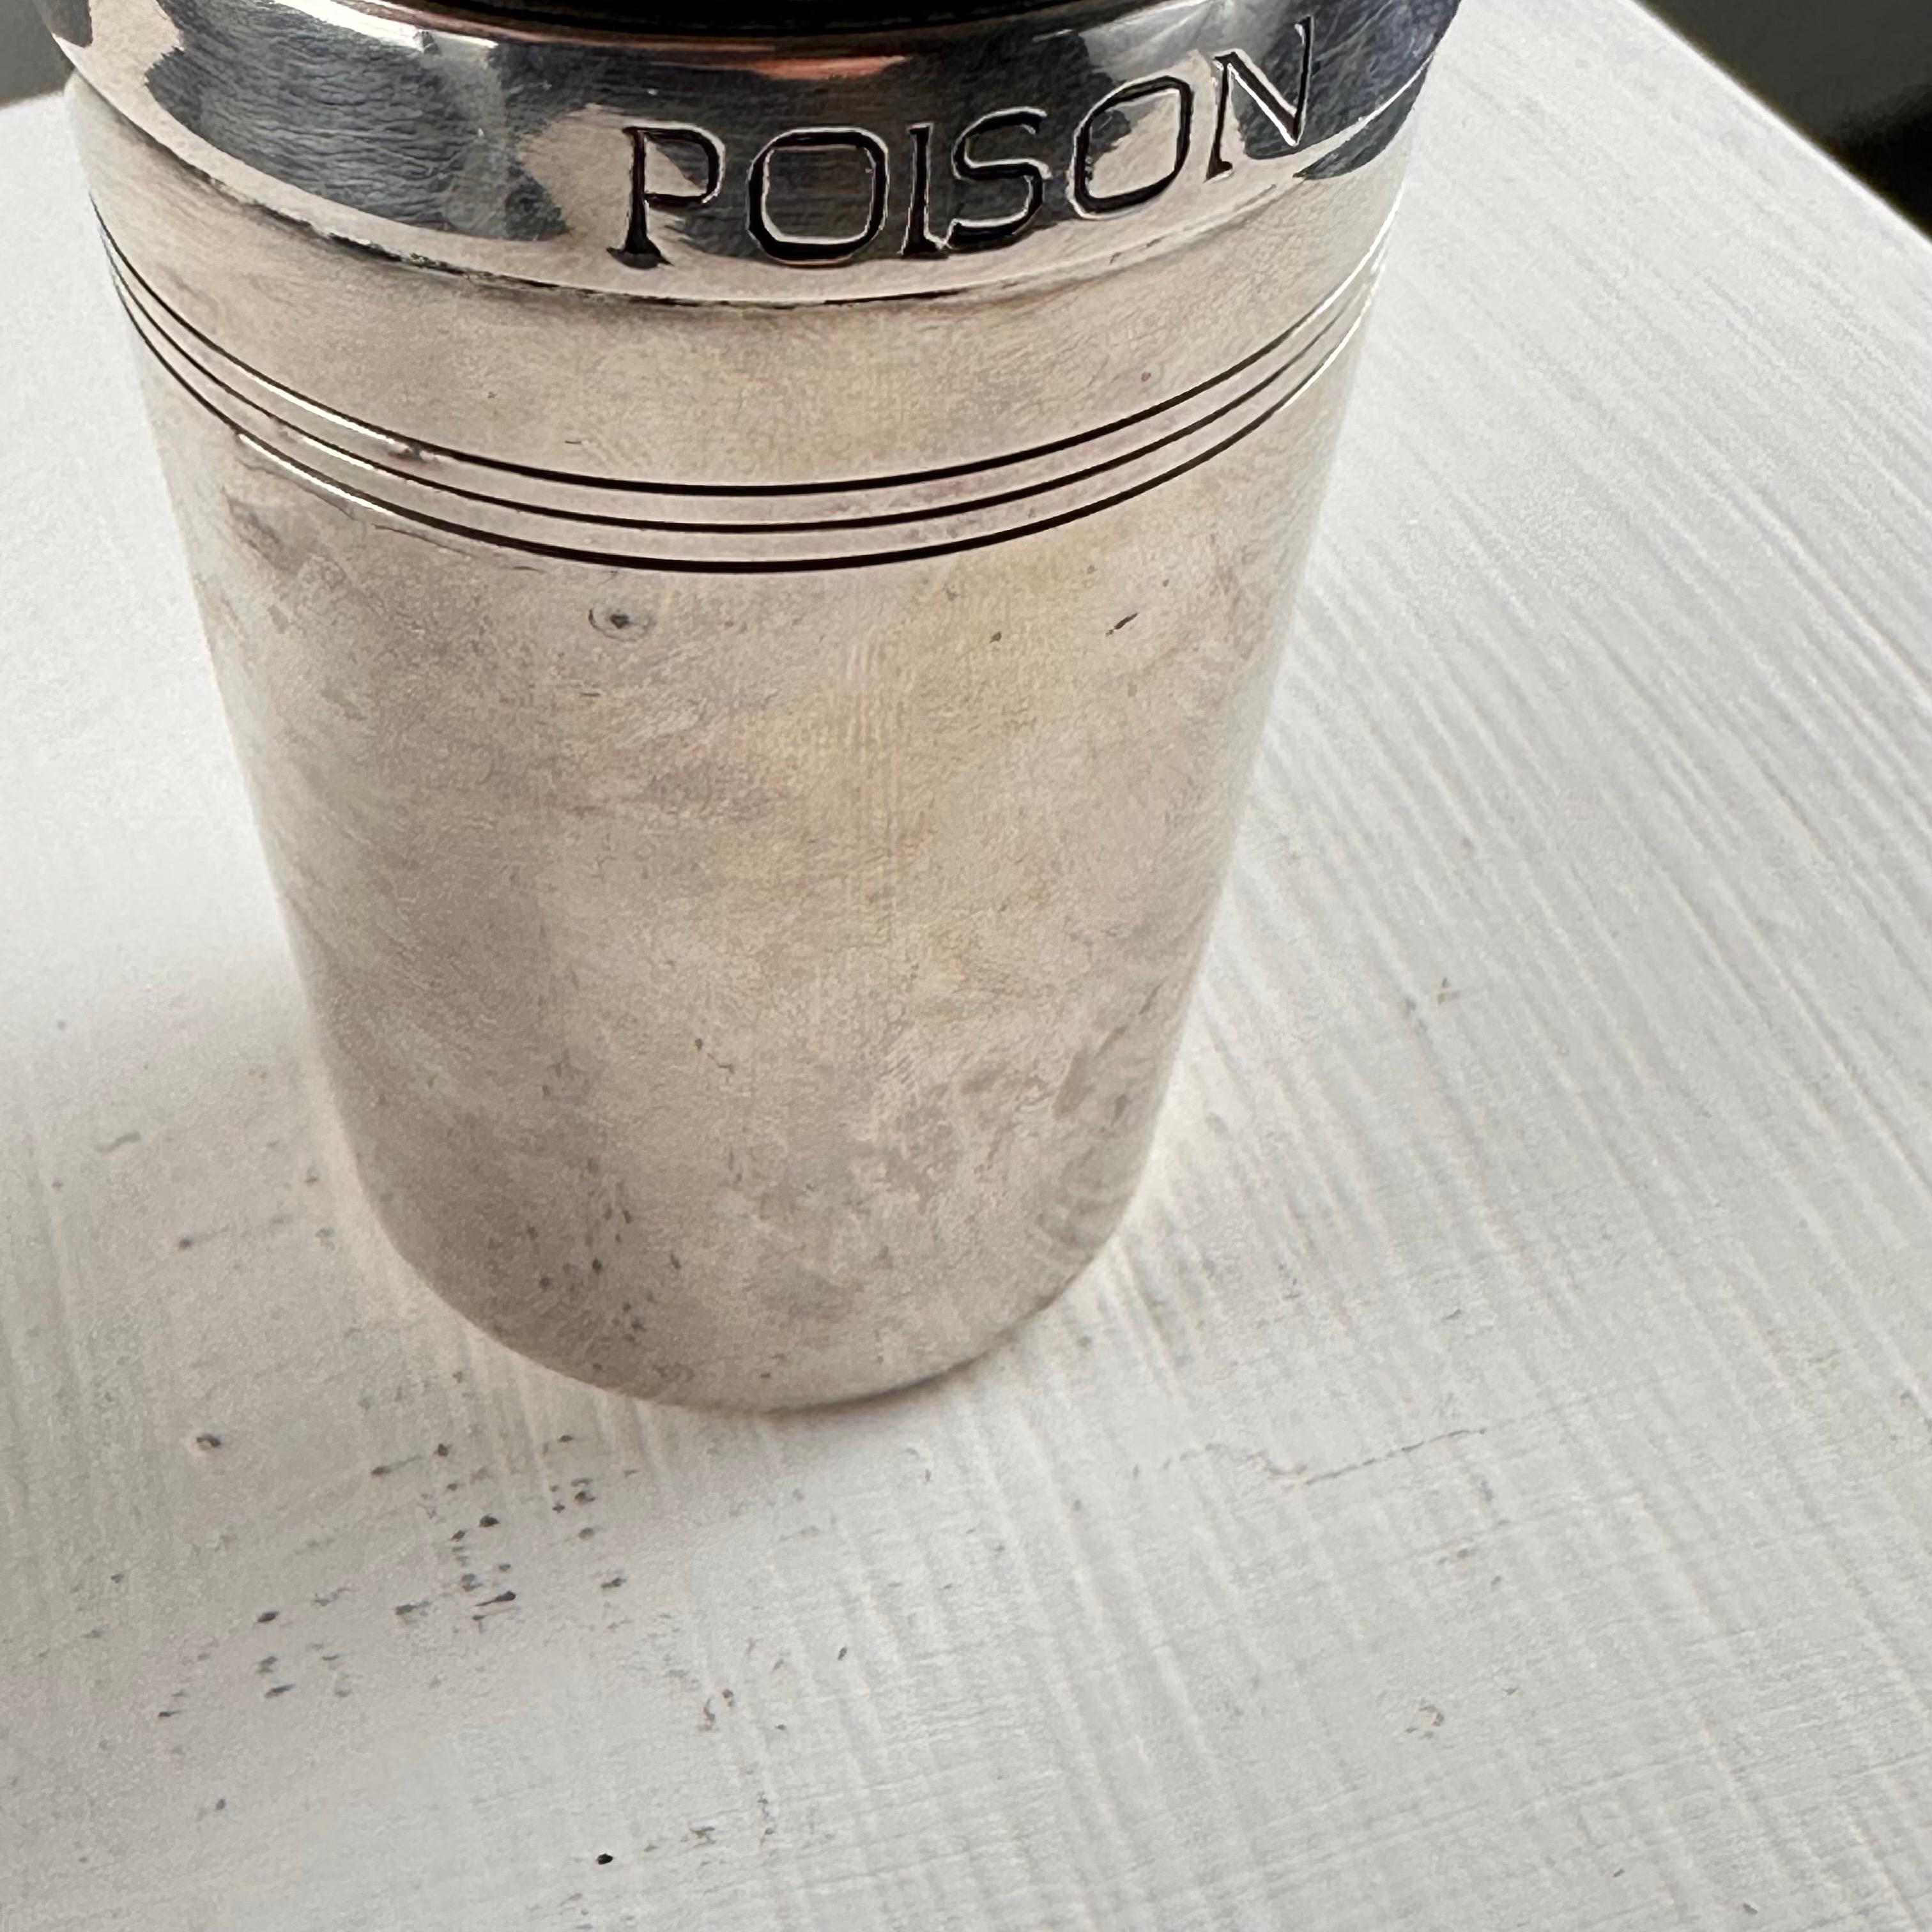 Late 20th Century Vintage Christian Dior Round Silver Plate Talcum Pouch Box 'Poison', 1980s For Sale